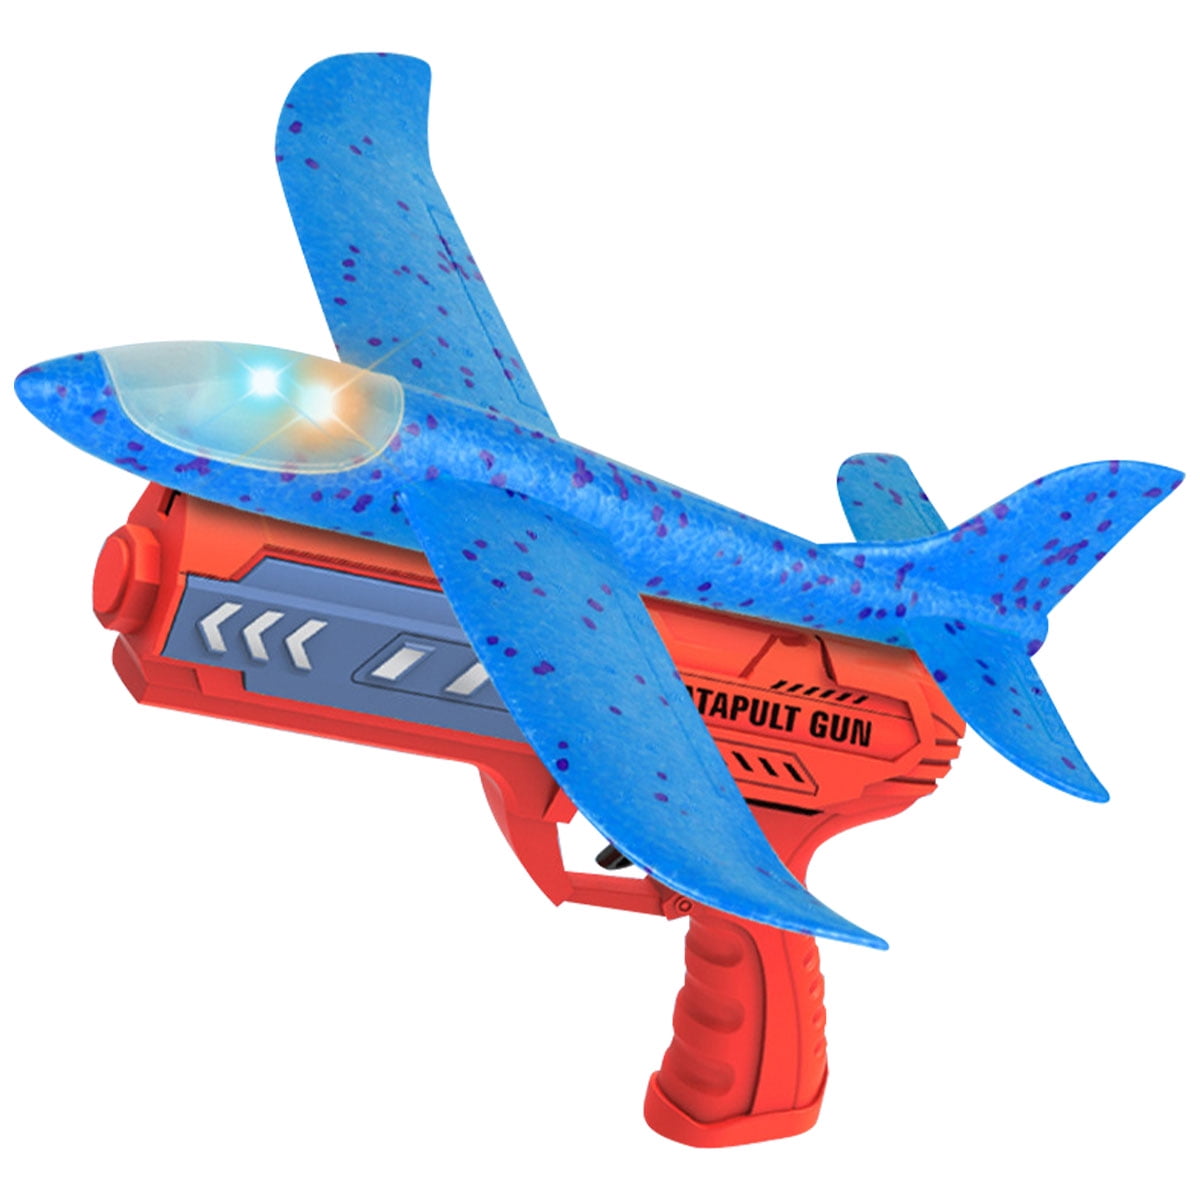 LiKee Airplane Toy Launcher Flying Shooting Games 2 Flight Mode Catapult Foam Aircrafts Outdoor Yard Gliders Sport Activity Birthday Party Favors Gifts for Kids Boys Girls 6 Blue Years Old 